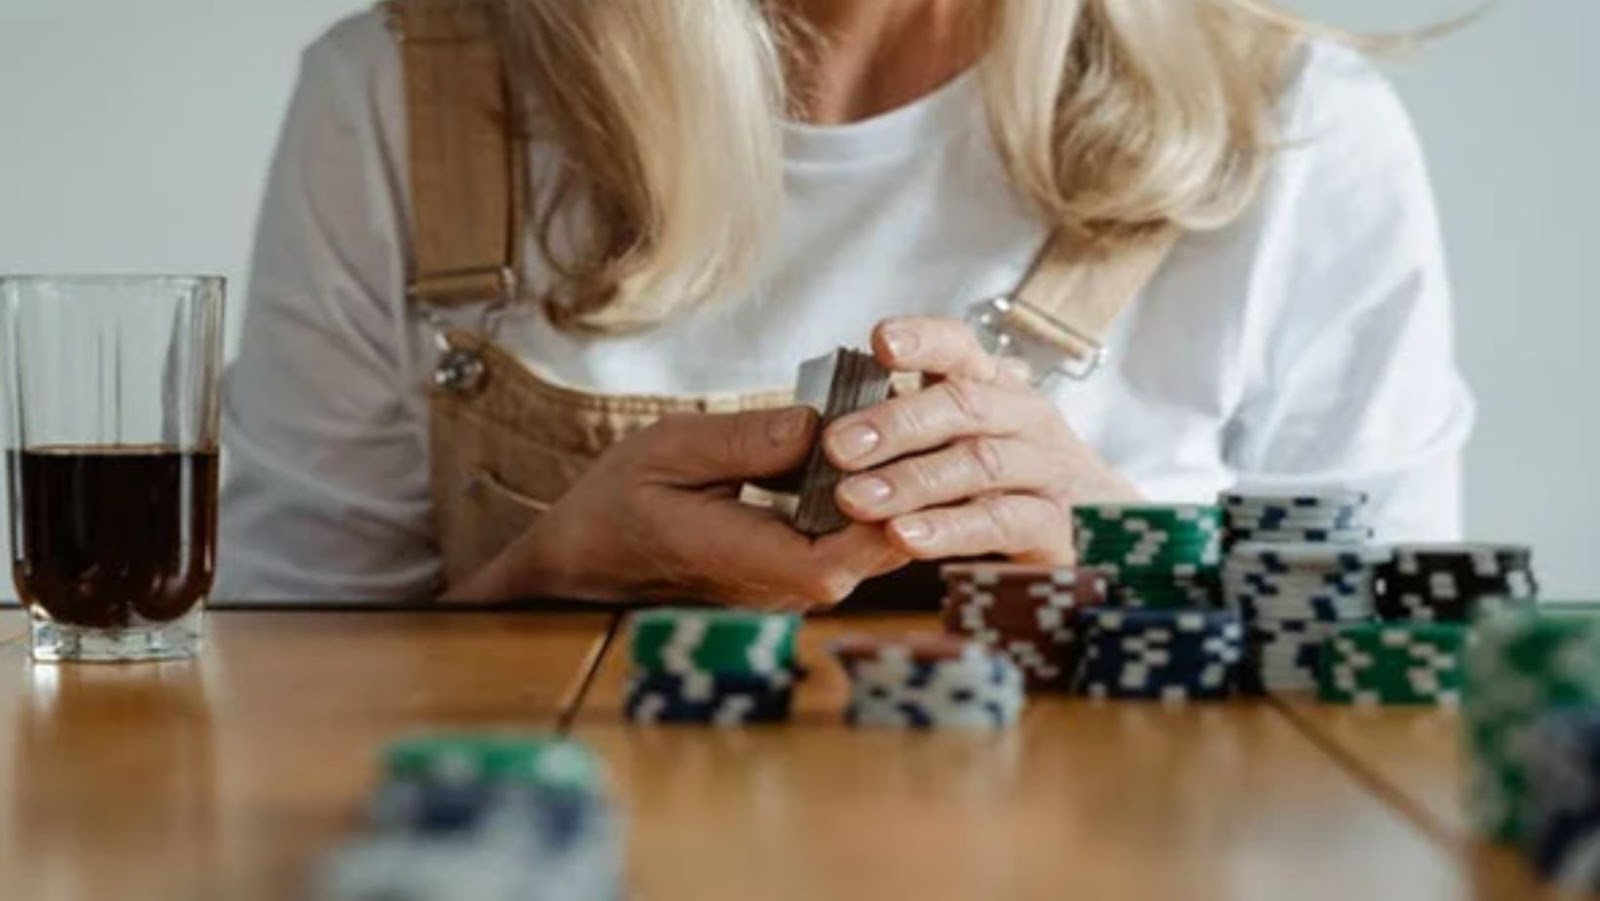 How to Play Poker: 10 Ways to Place Your Bets